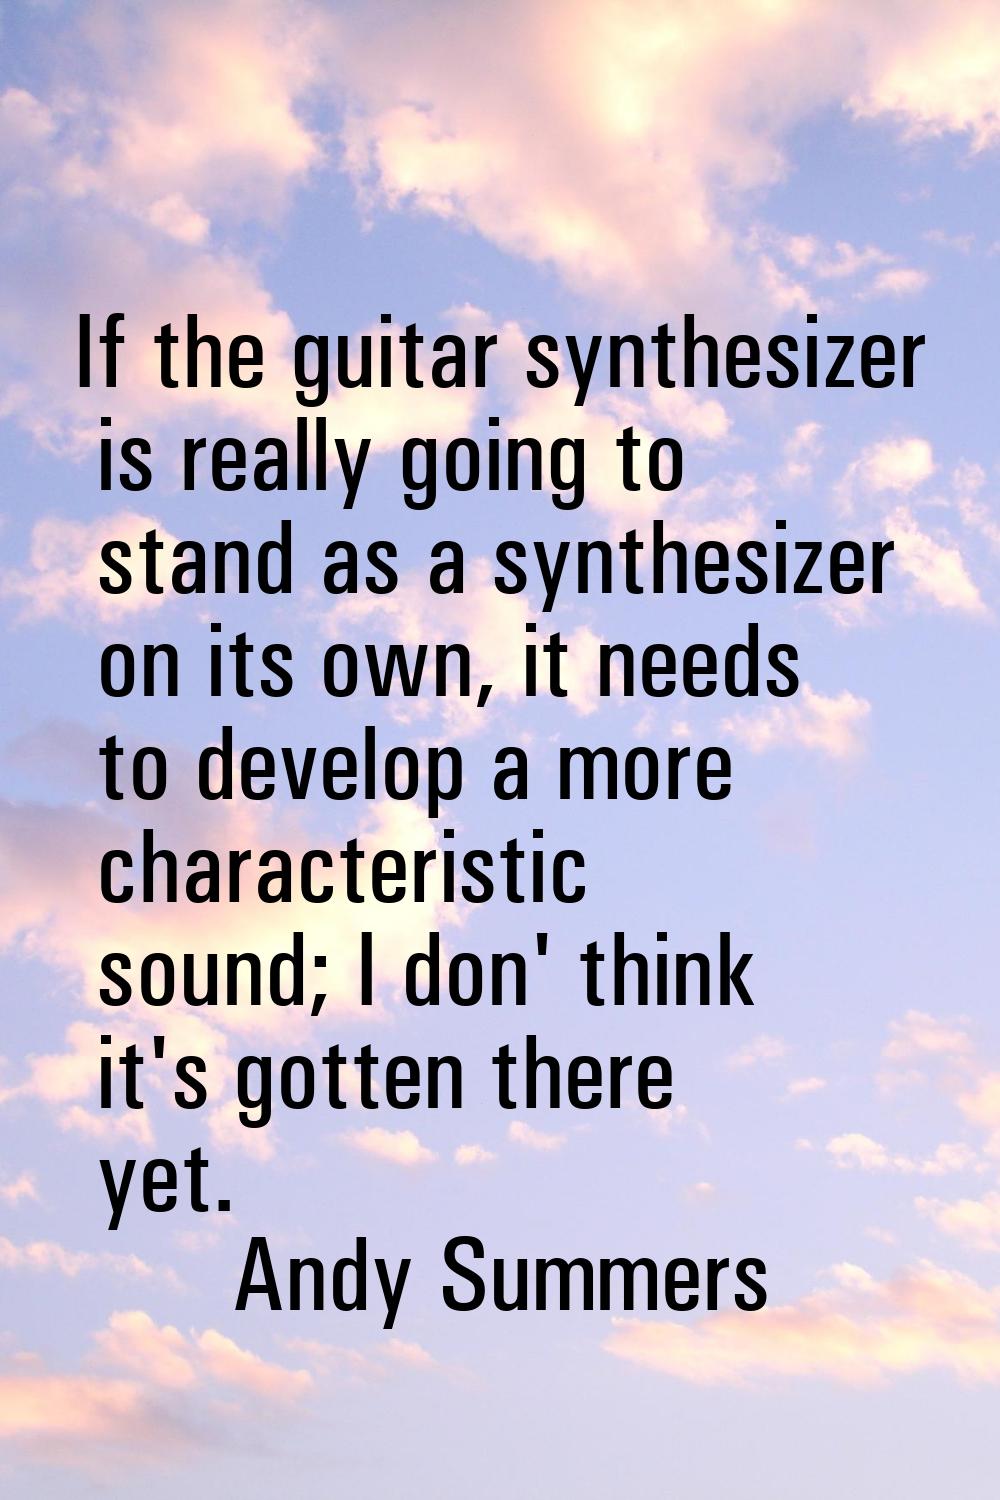 If the guitar synthesizer is really going to stand as a synthesizer on its own, it needs to develop